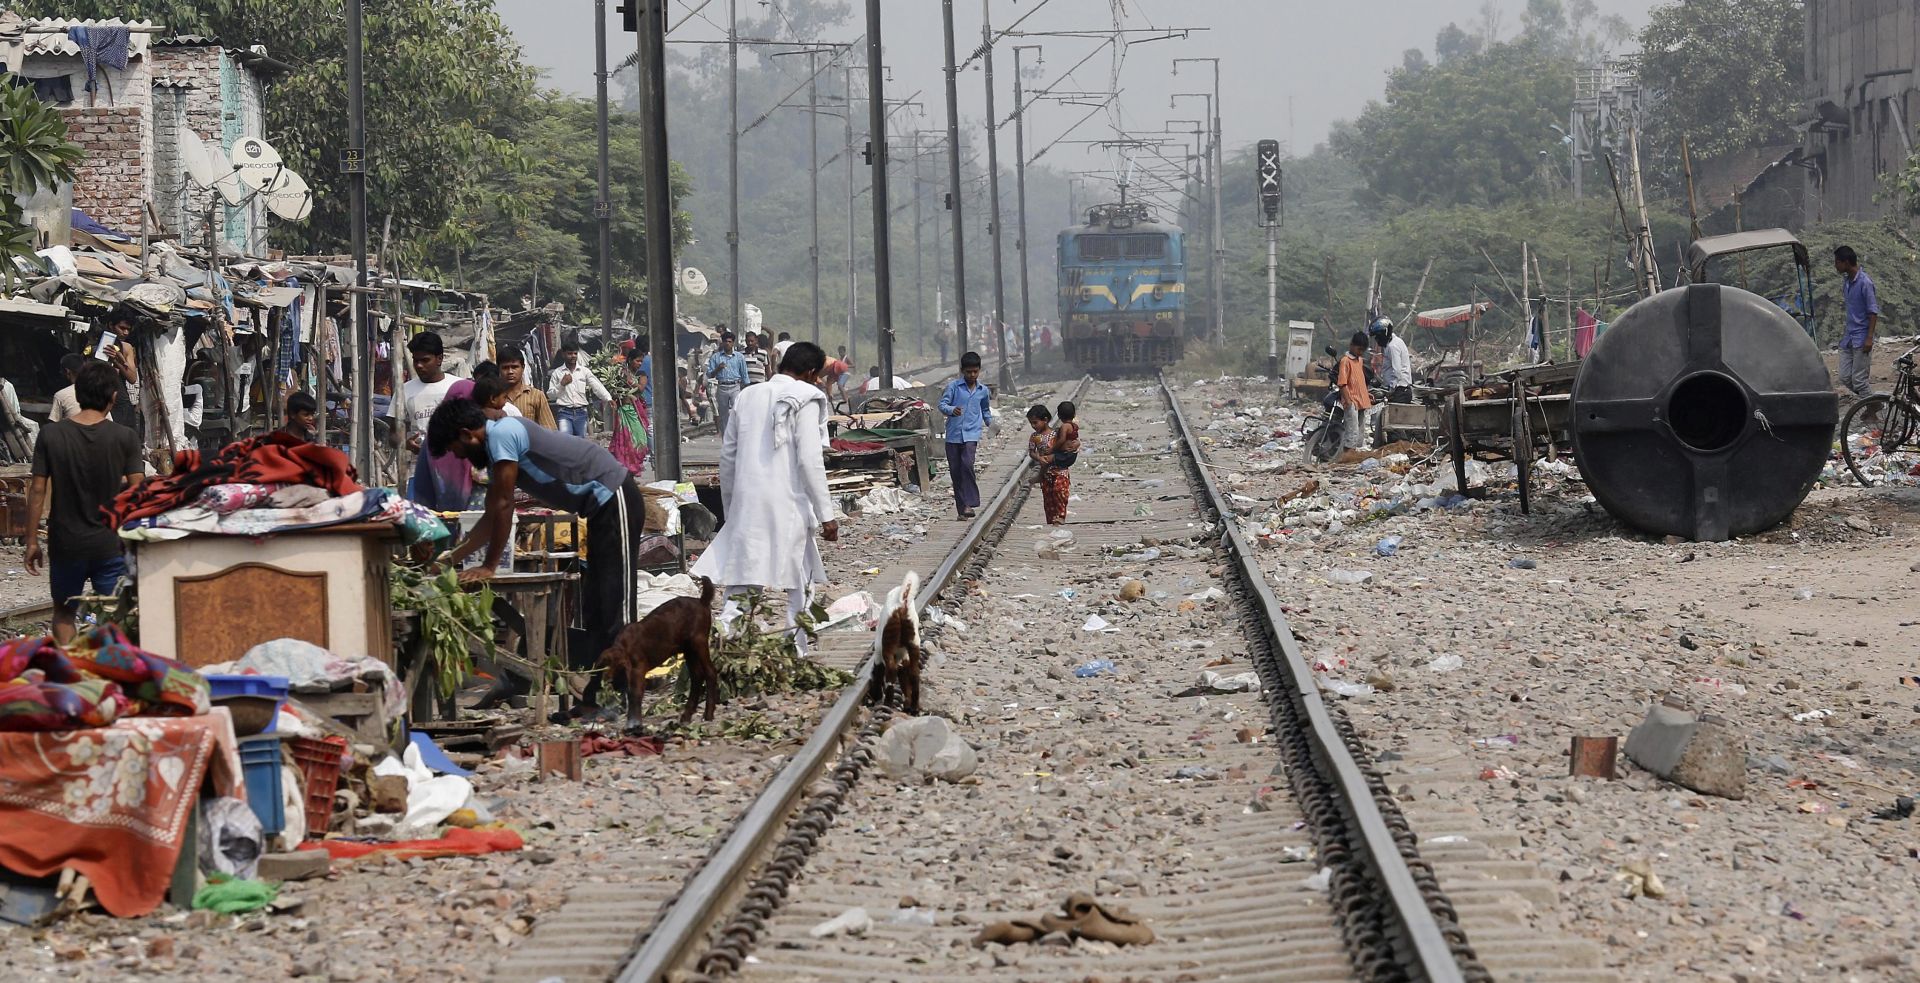 epa04976967 People stand near train tracks in a slum area where a four-year-old girl was allegedly raped, New Delhi, India, 14 October 2015. According to media reports, two men are being questioned by police related to the rape of a 4-year-old girl in Delhi. The girl was found by some railway lines on 09 October and is in hospital with serious injuries.  EPA/RAJAT GUPTA